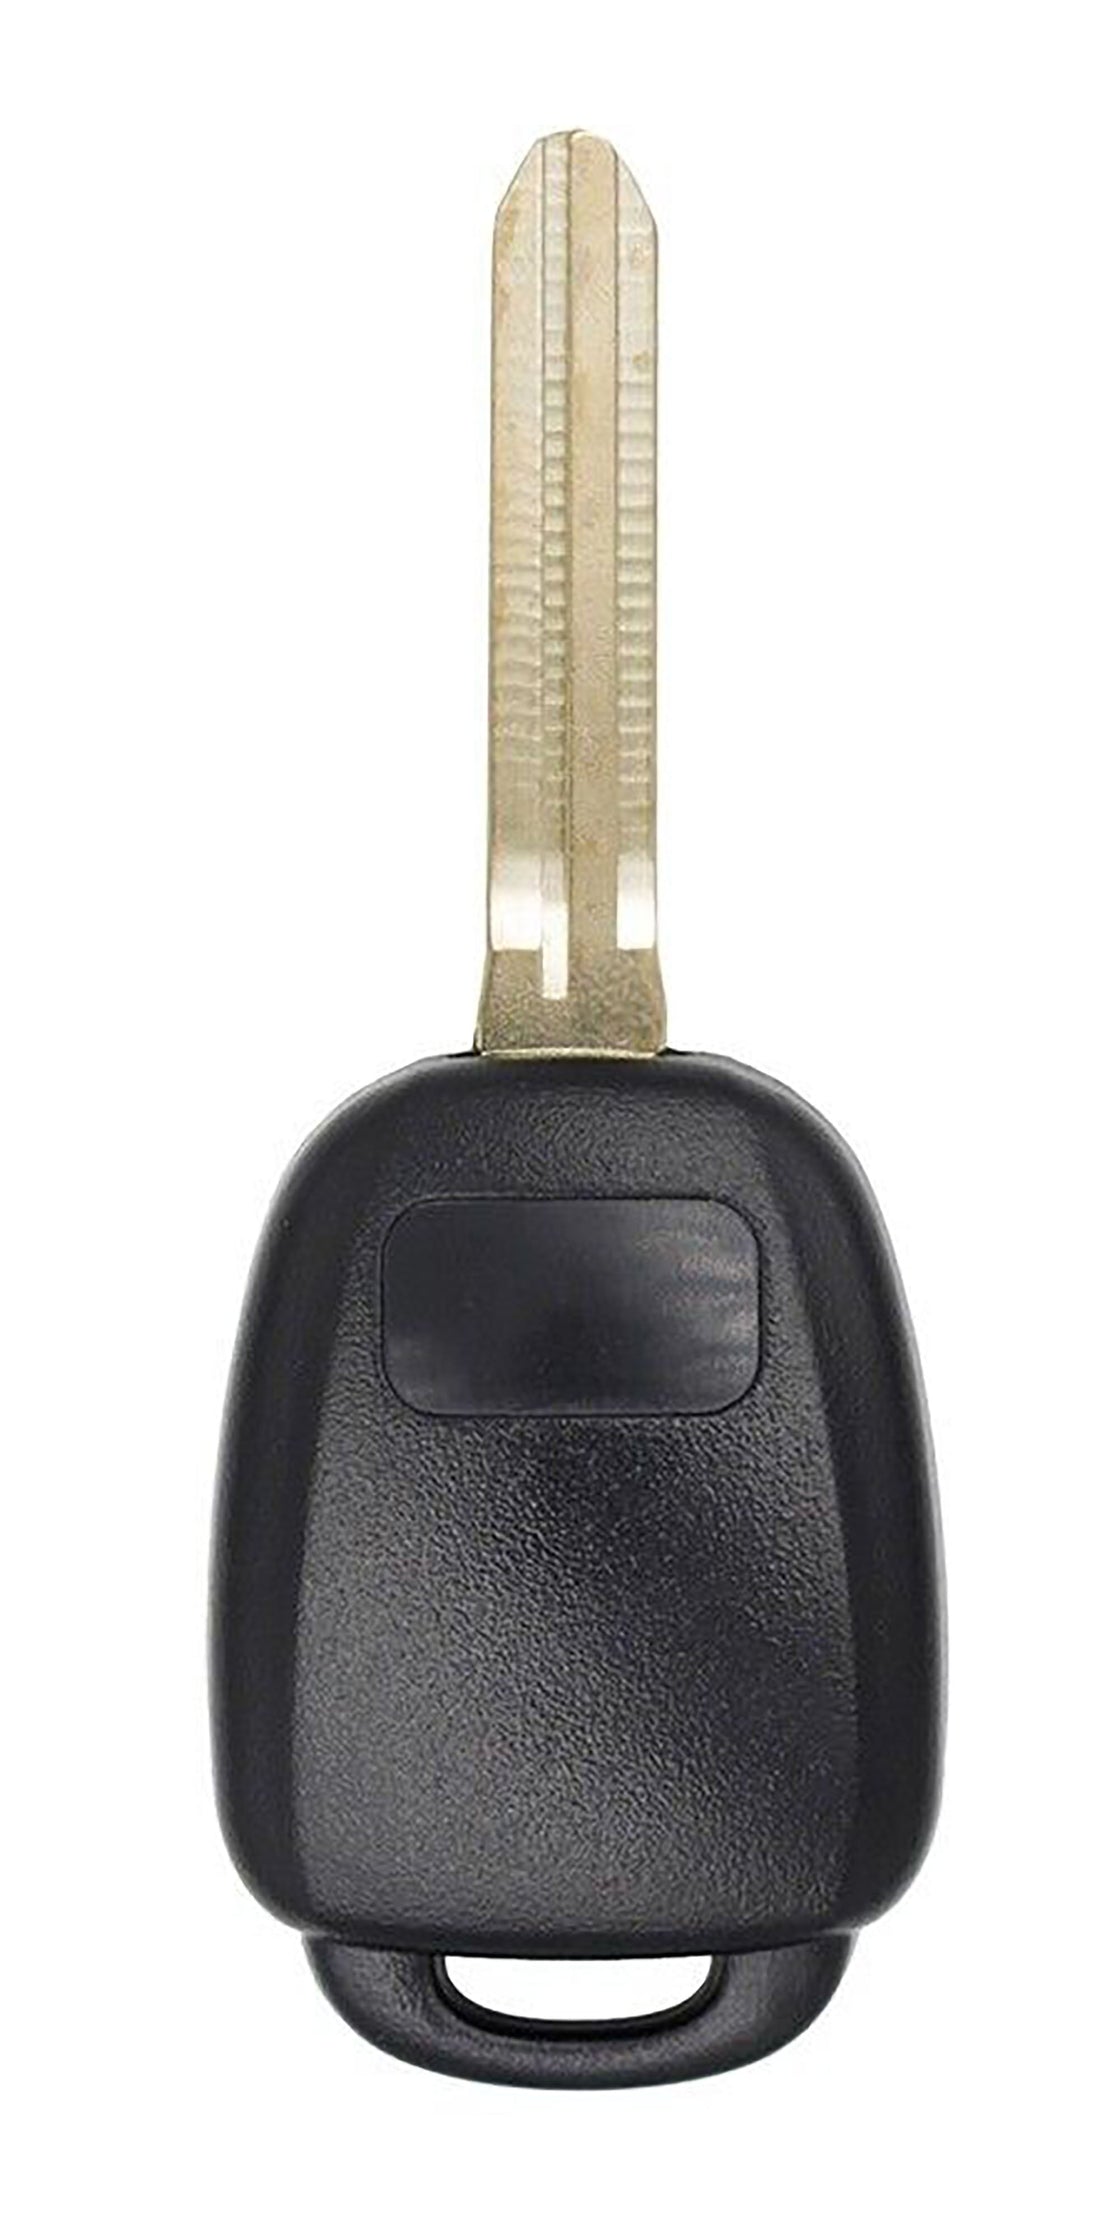 2016 Toyota Tacoma Replacement Key Fob Remote